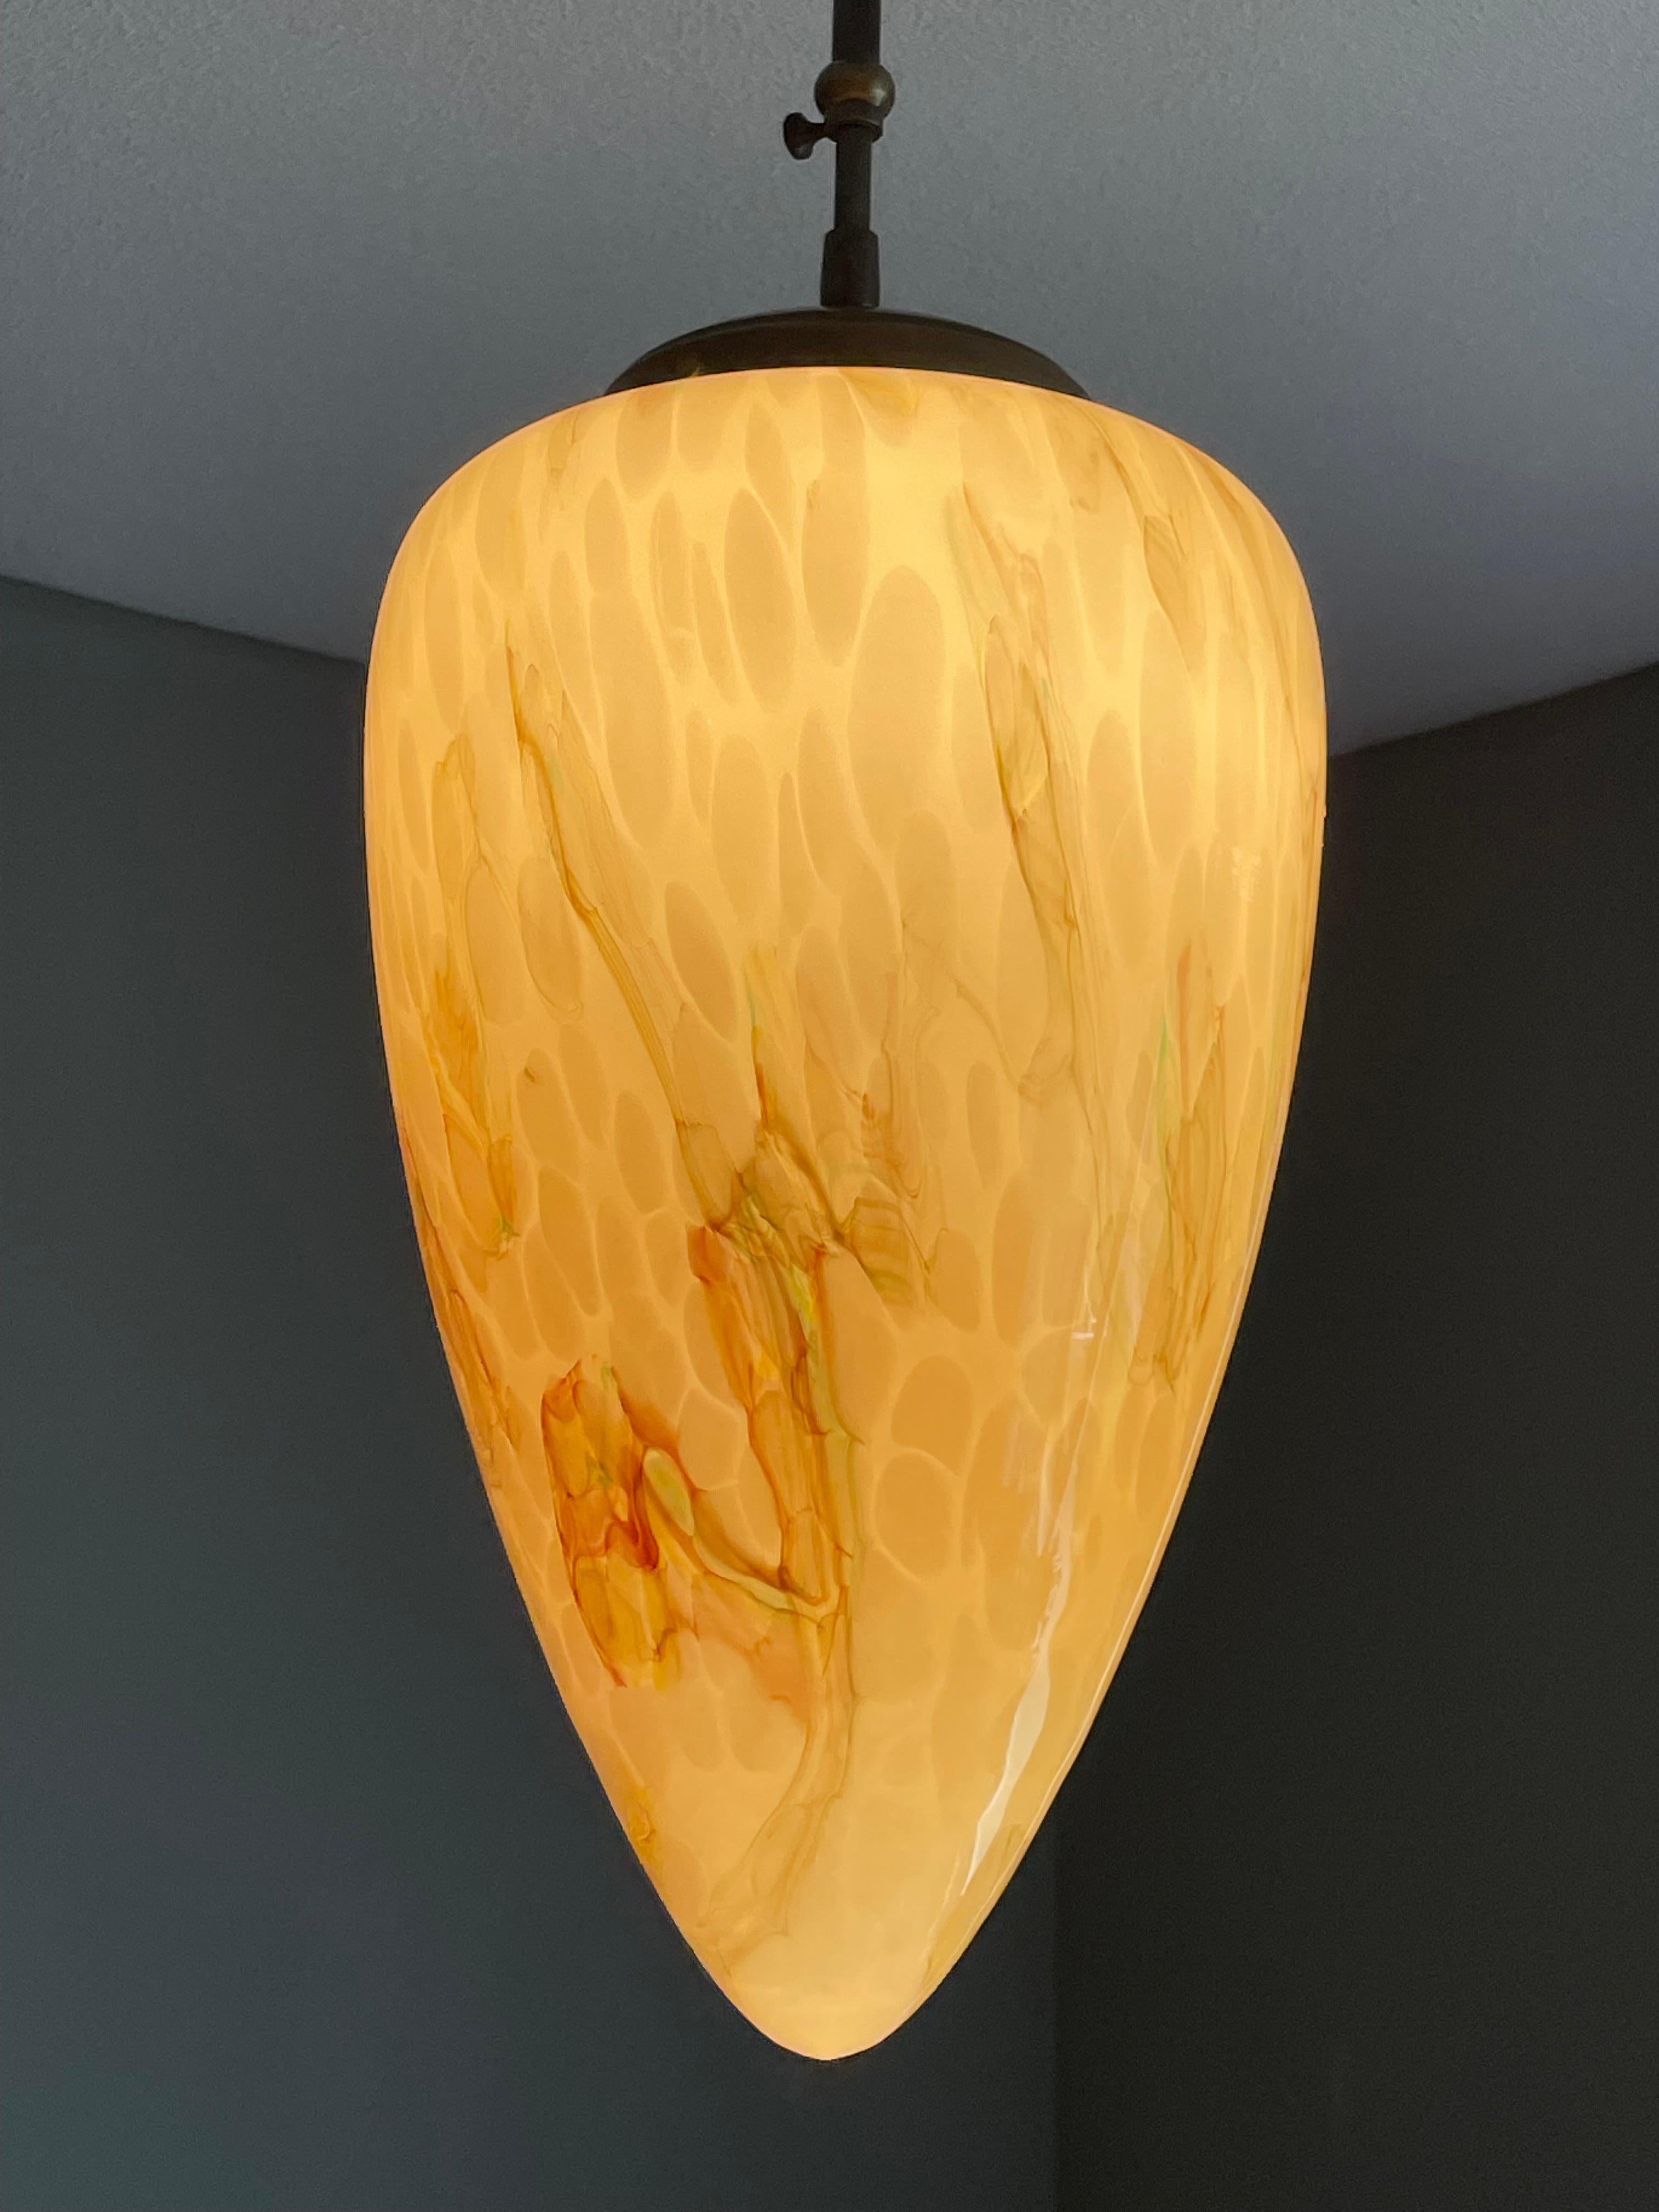 Large Size & Great Cone Shape Midcentury Made Art Deco Style Glass Pendant Light For Sale 3